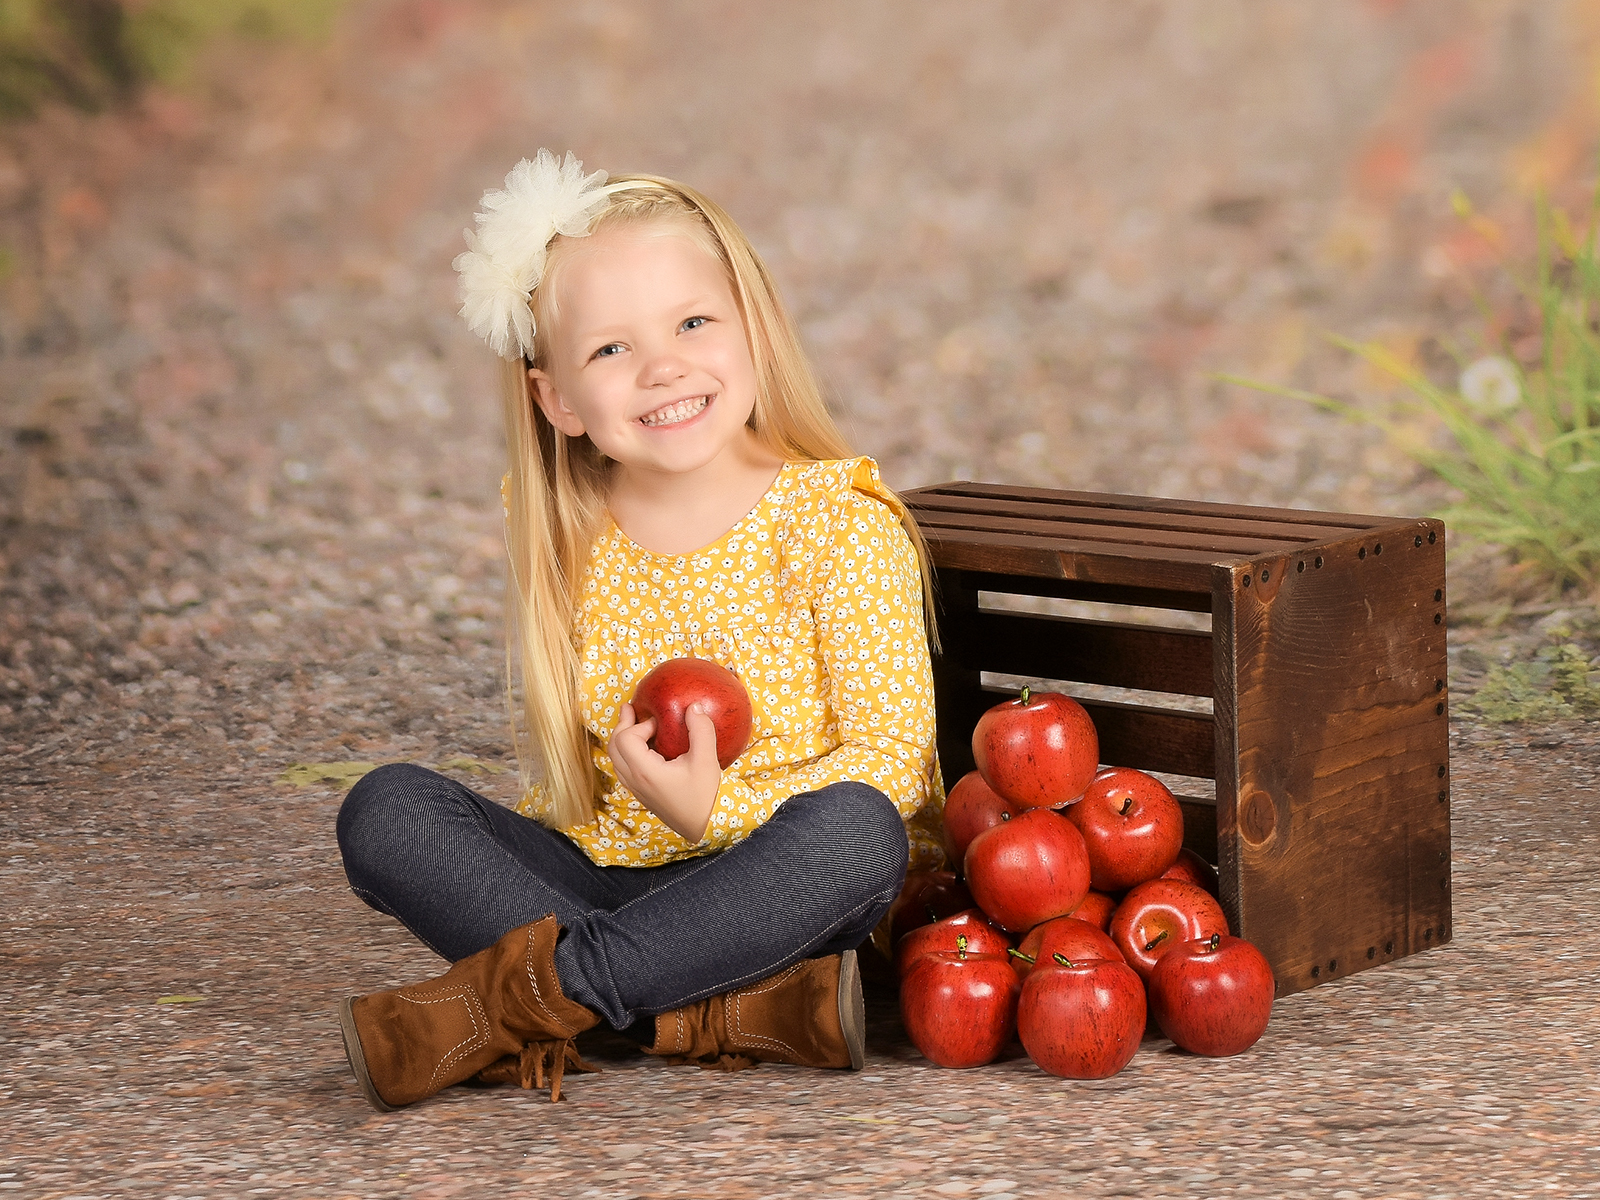 Preschool Photography Idea from Lifetouch